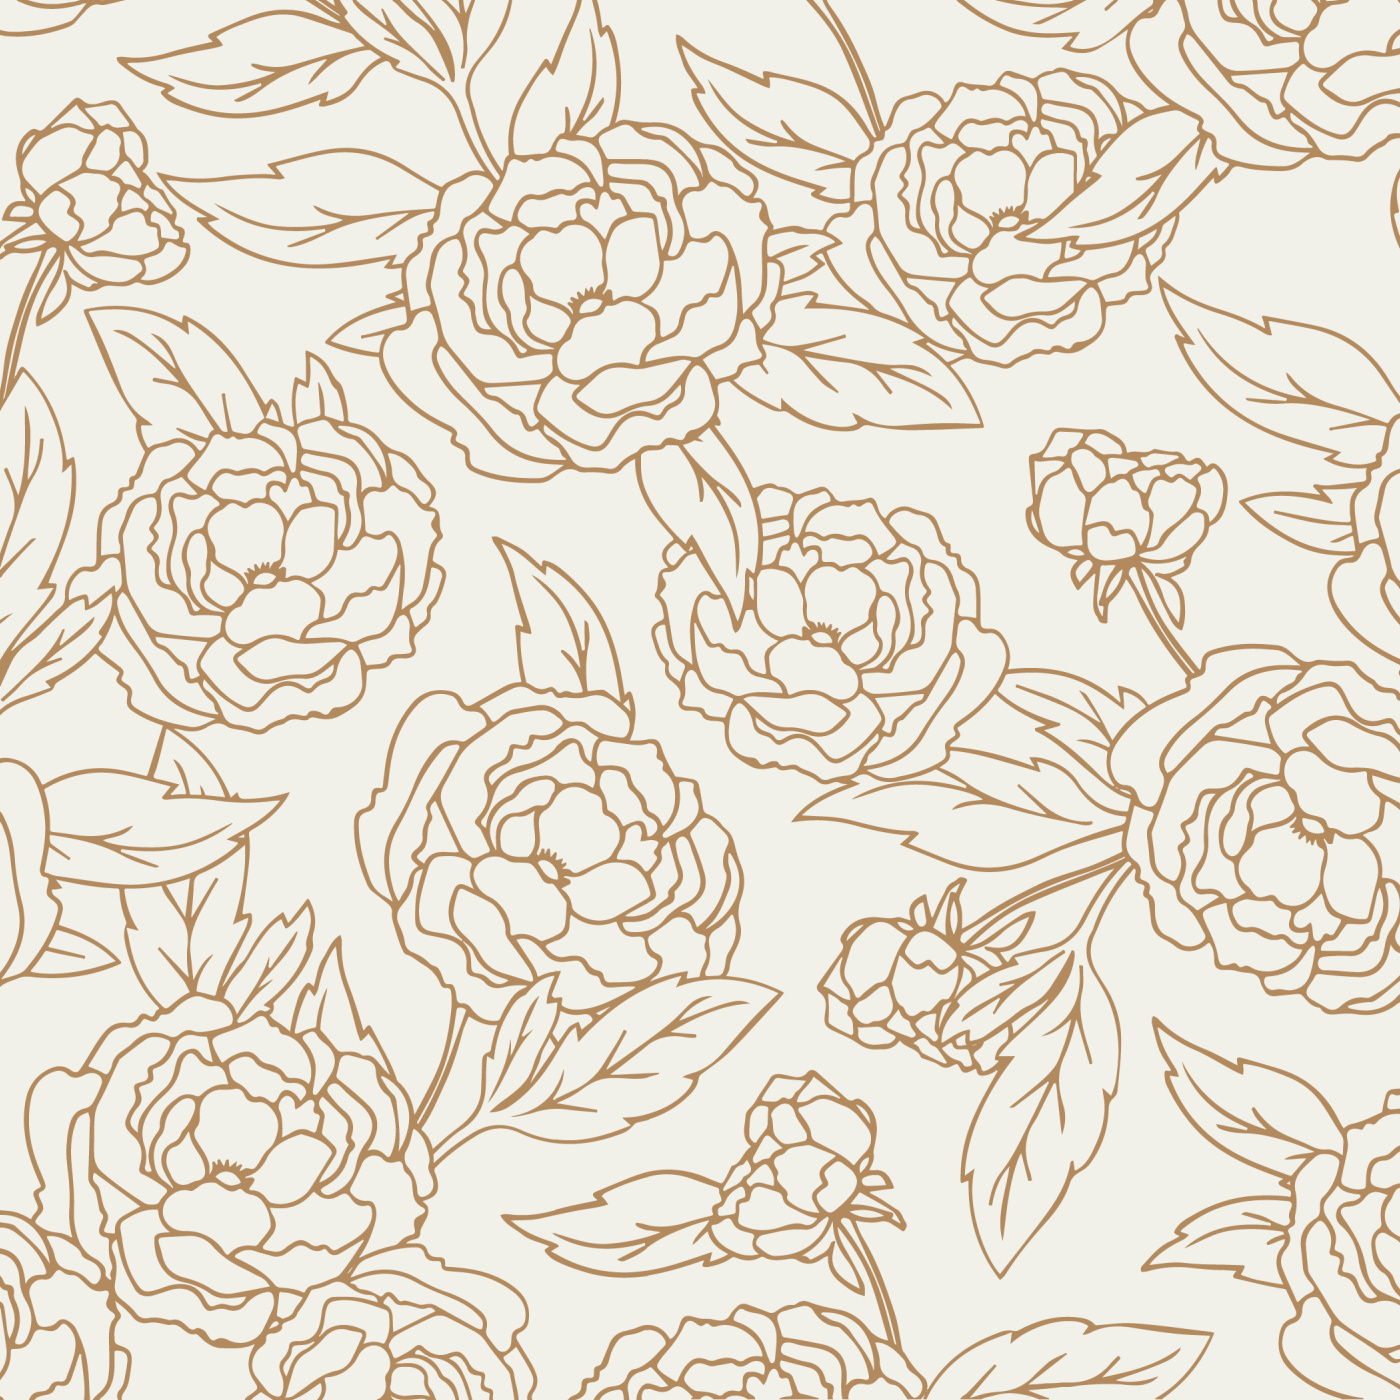 Outlined Peonies Peel And Stick Removable Wallpaper | Love vs. Design